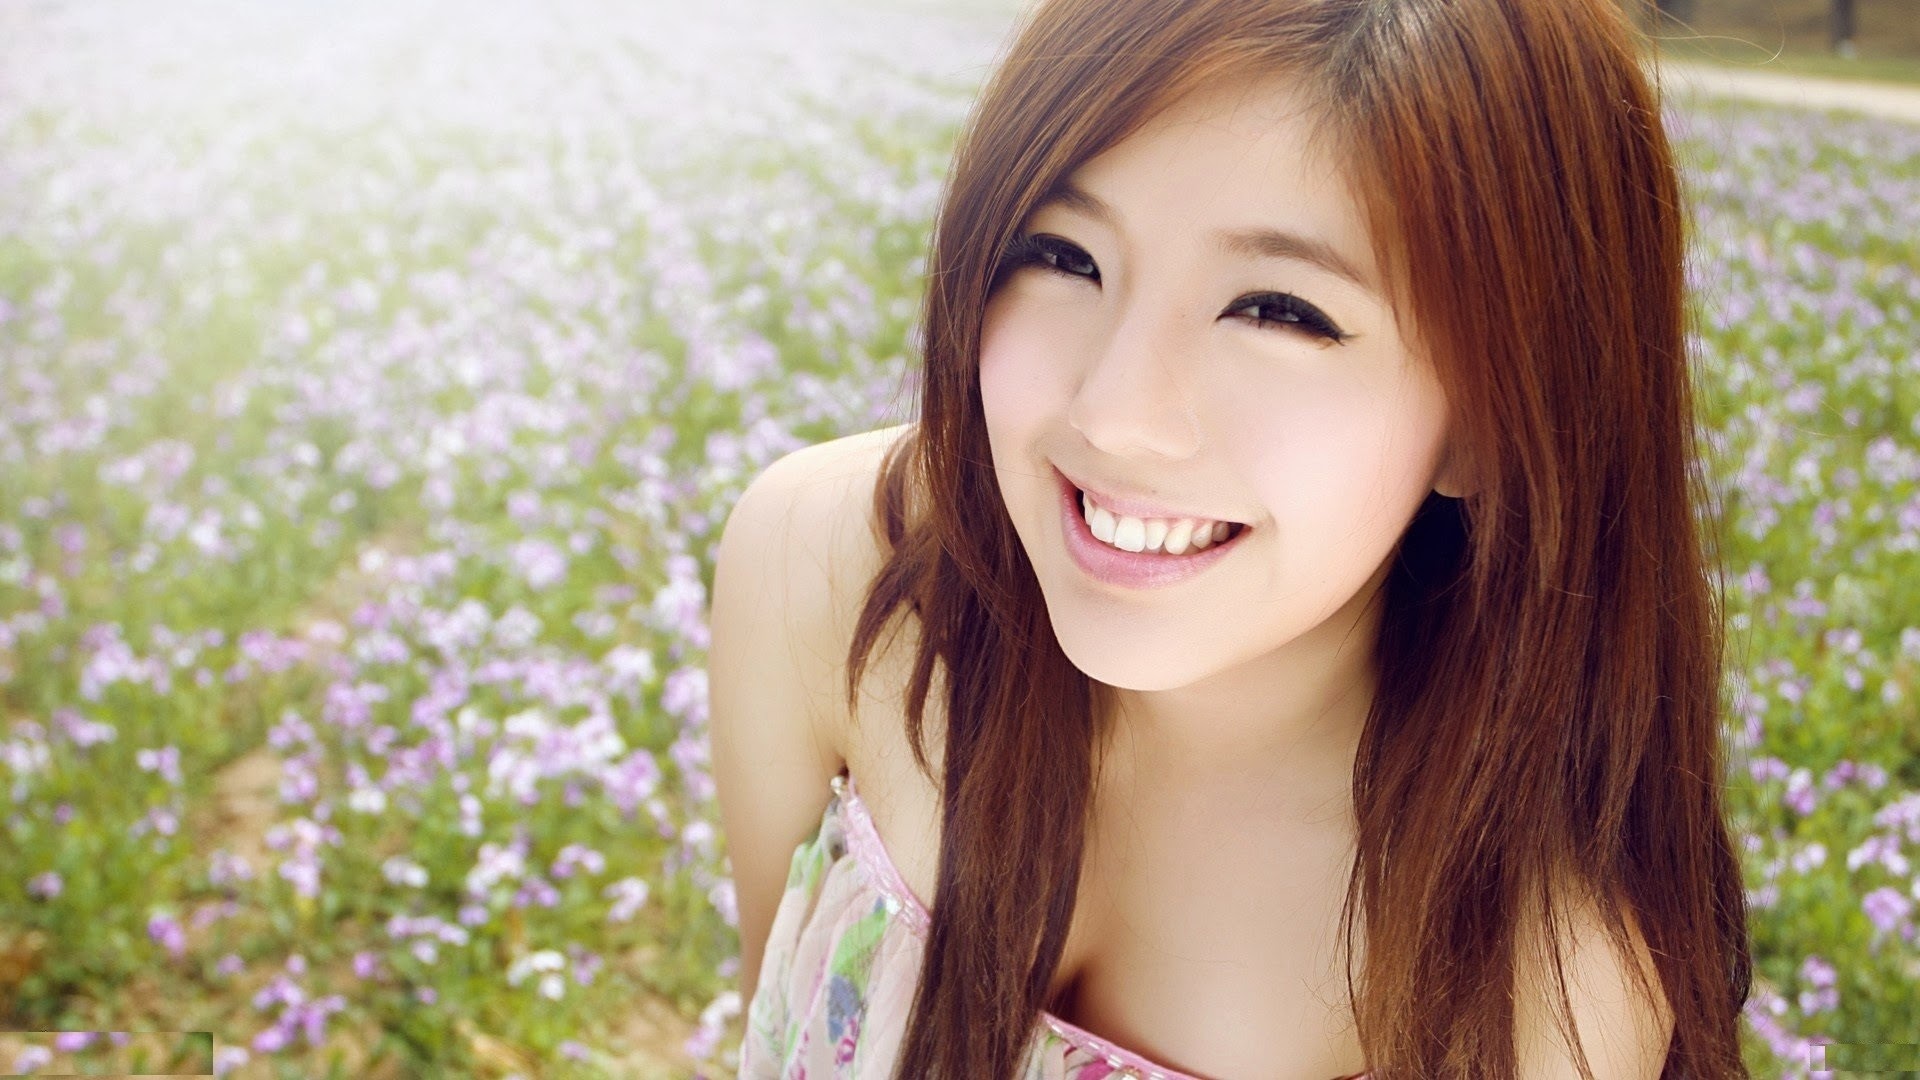 Free Download Beautiful Asian Girl Cute Smile Eyes Hd Wallpaper 1920x1080 1920x1080 For Your 